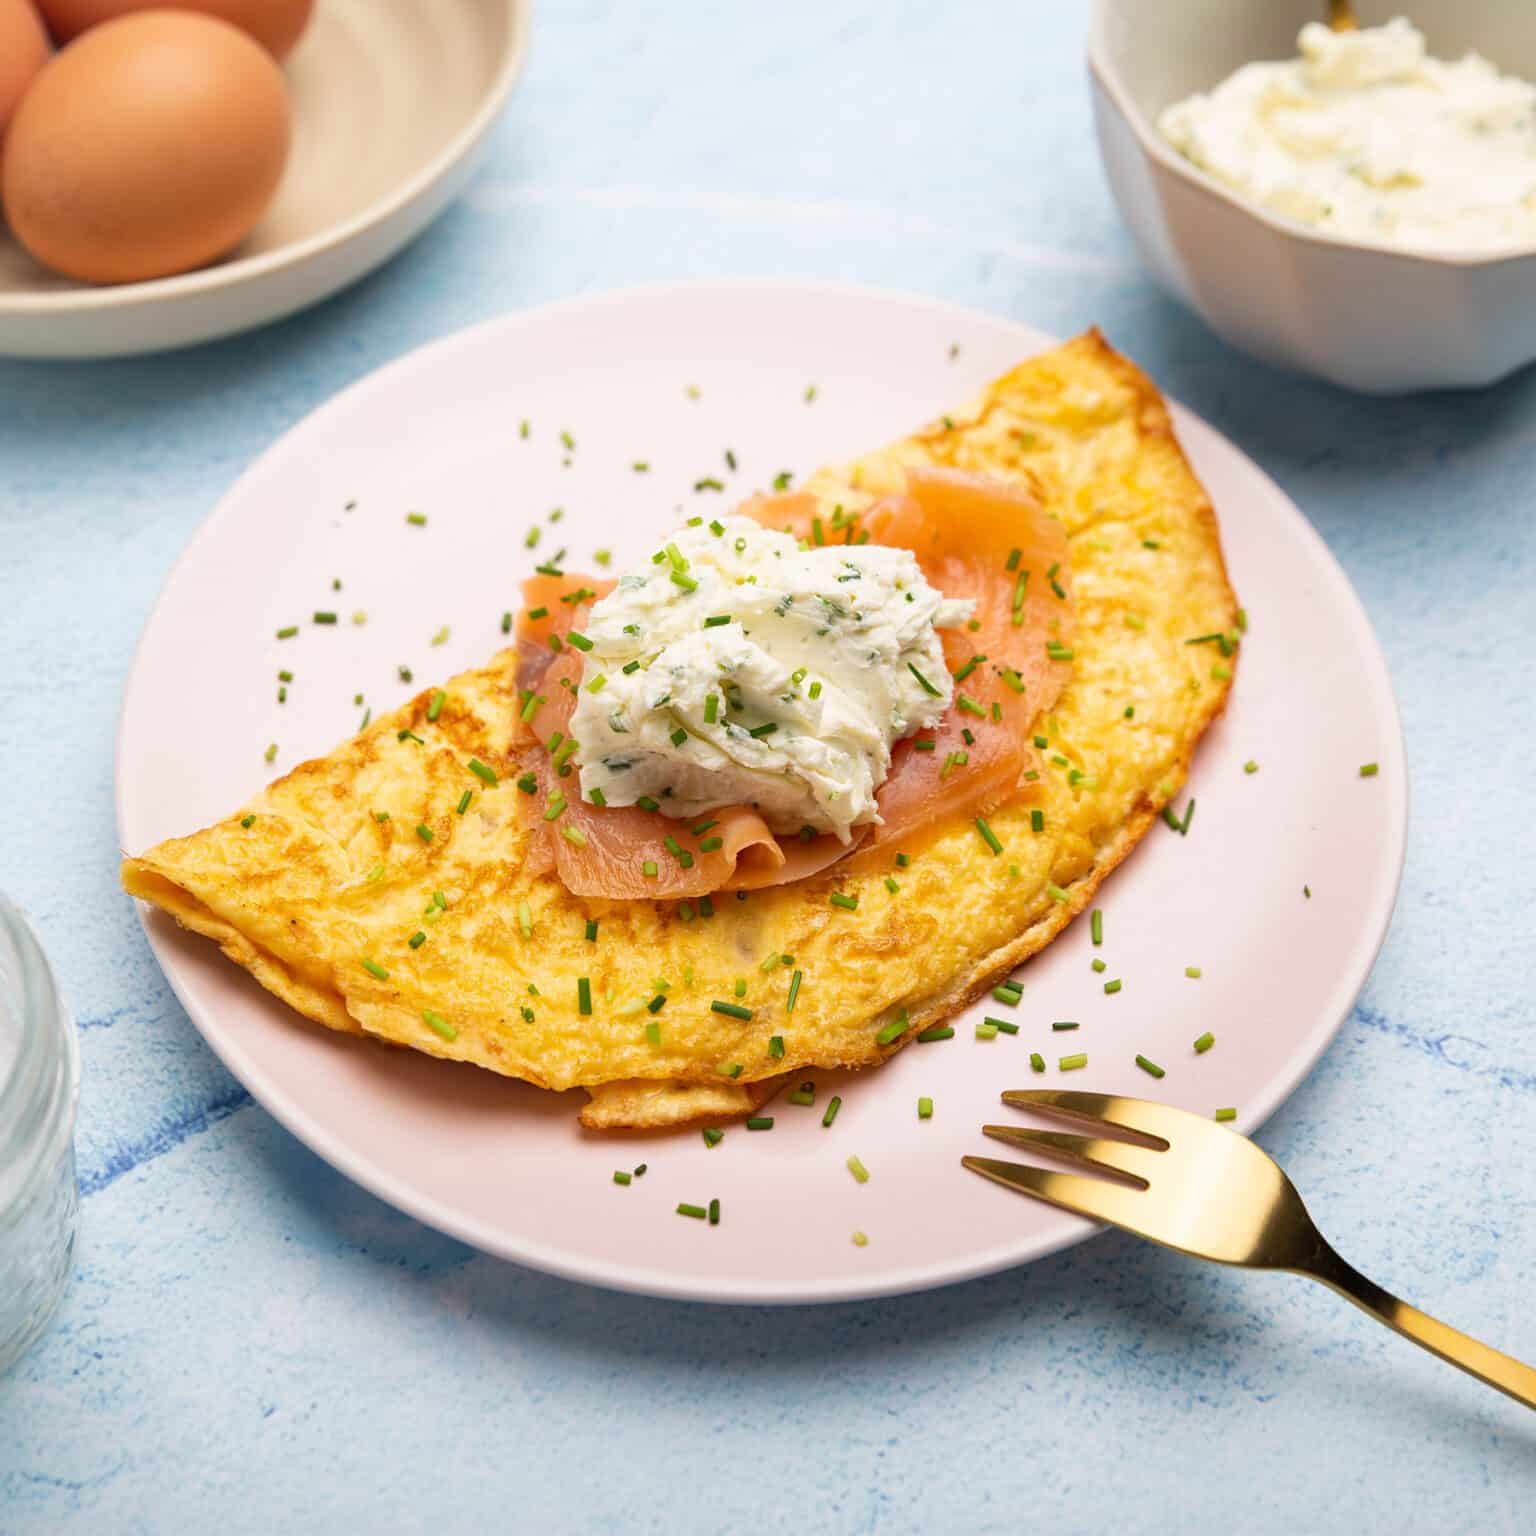 Omelet with smoked salmon and cream cheese on a pink plate with gold fork.